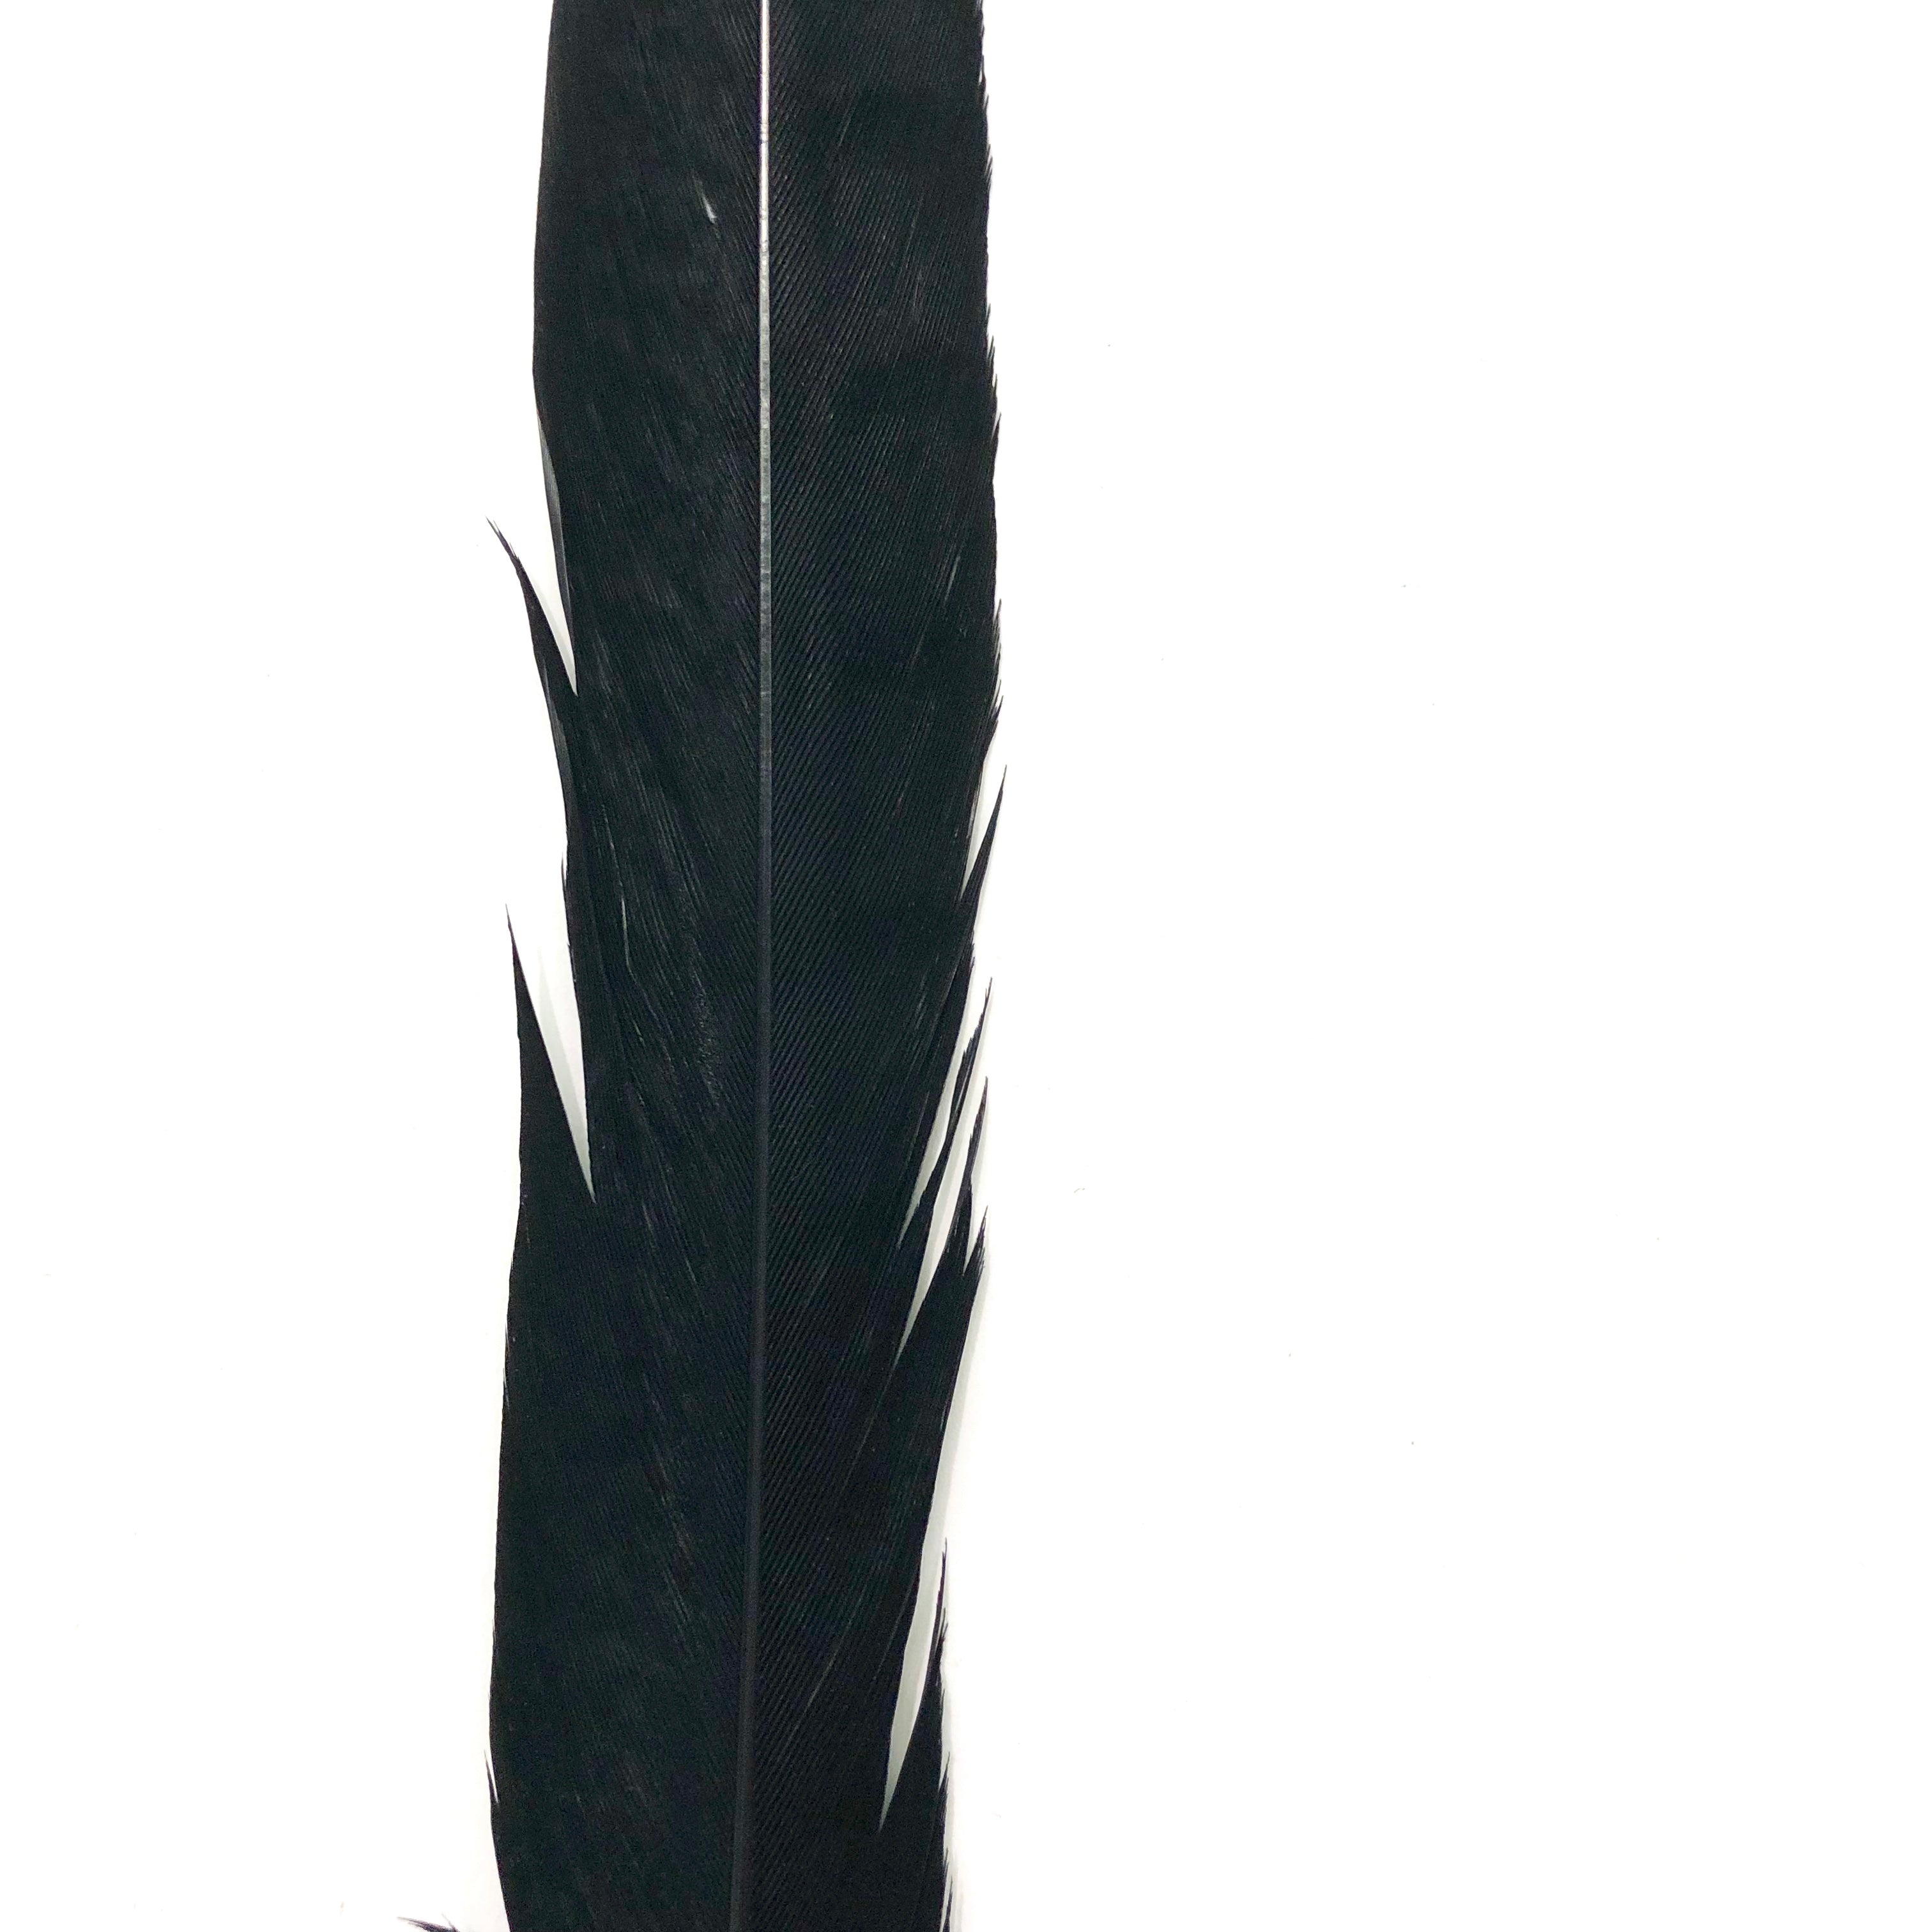 20" to 30" Lady Amherst Pheasant Side Tail Feather - Black ((SECONDS))